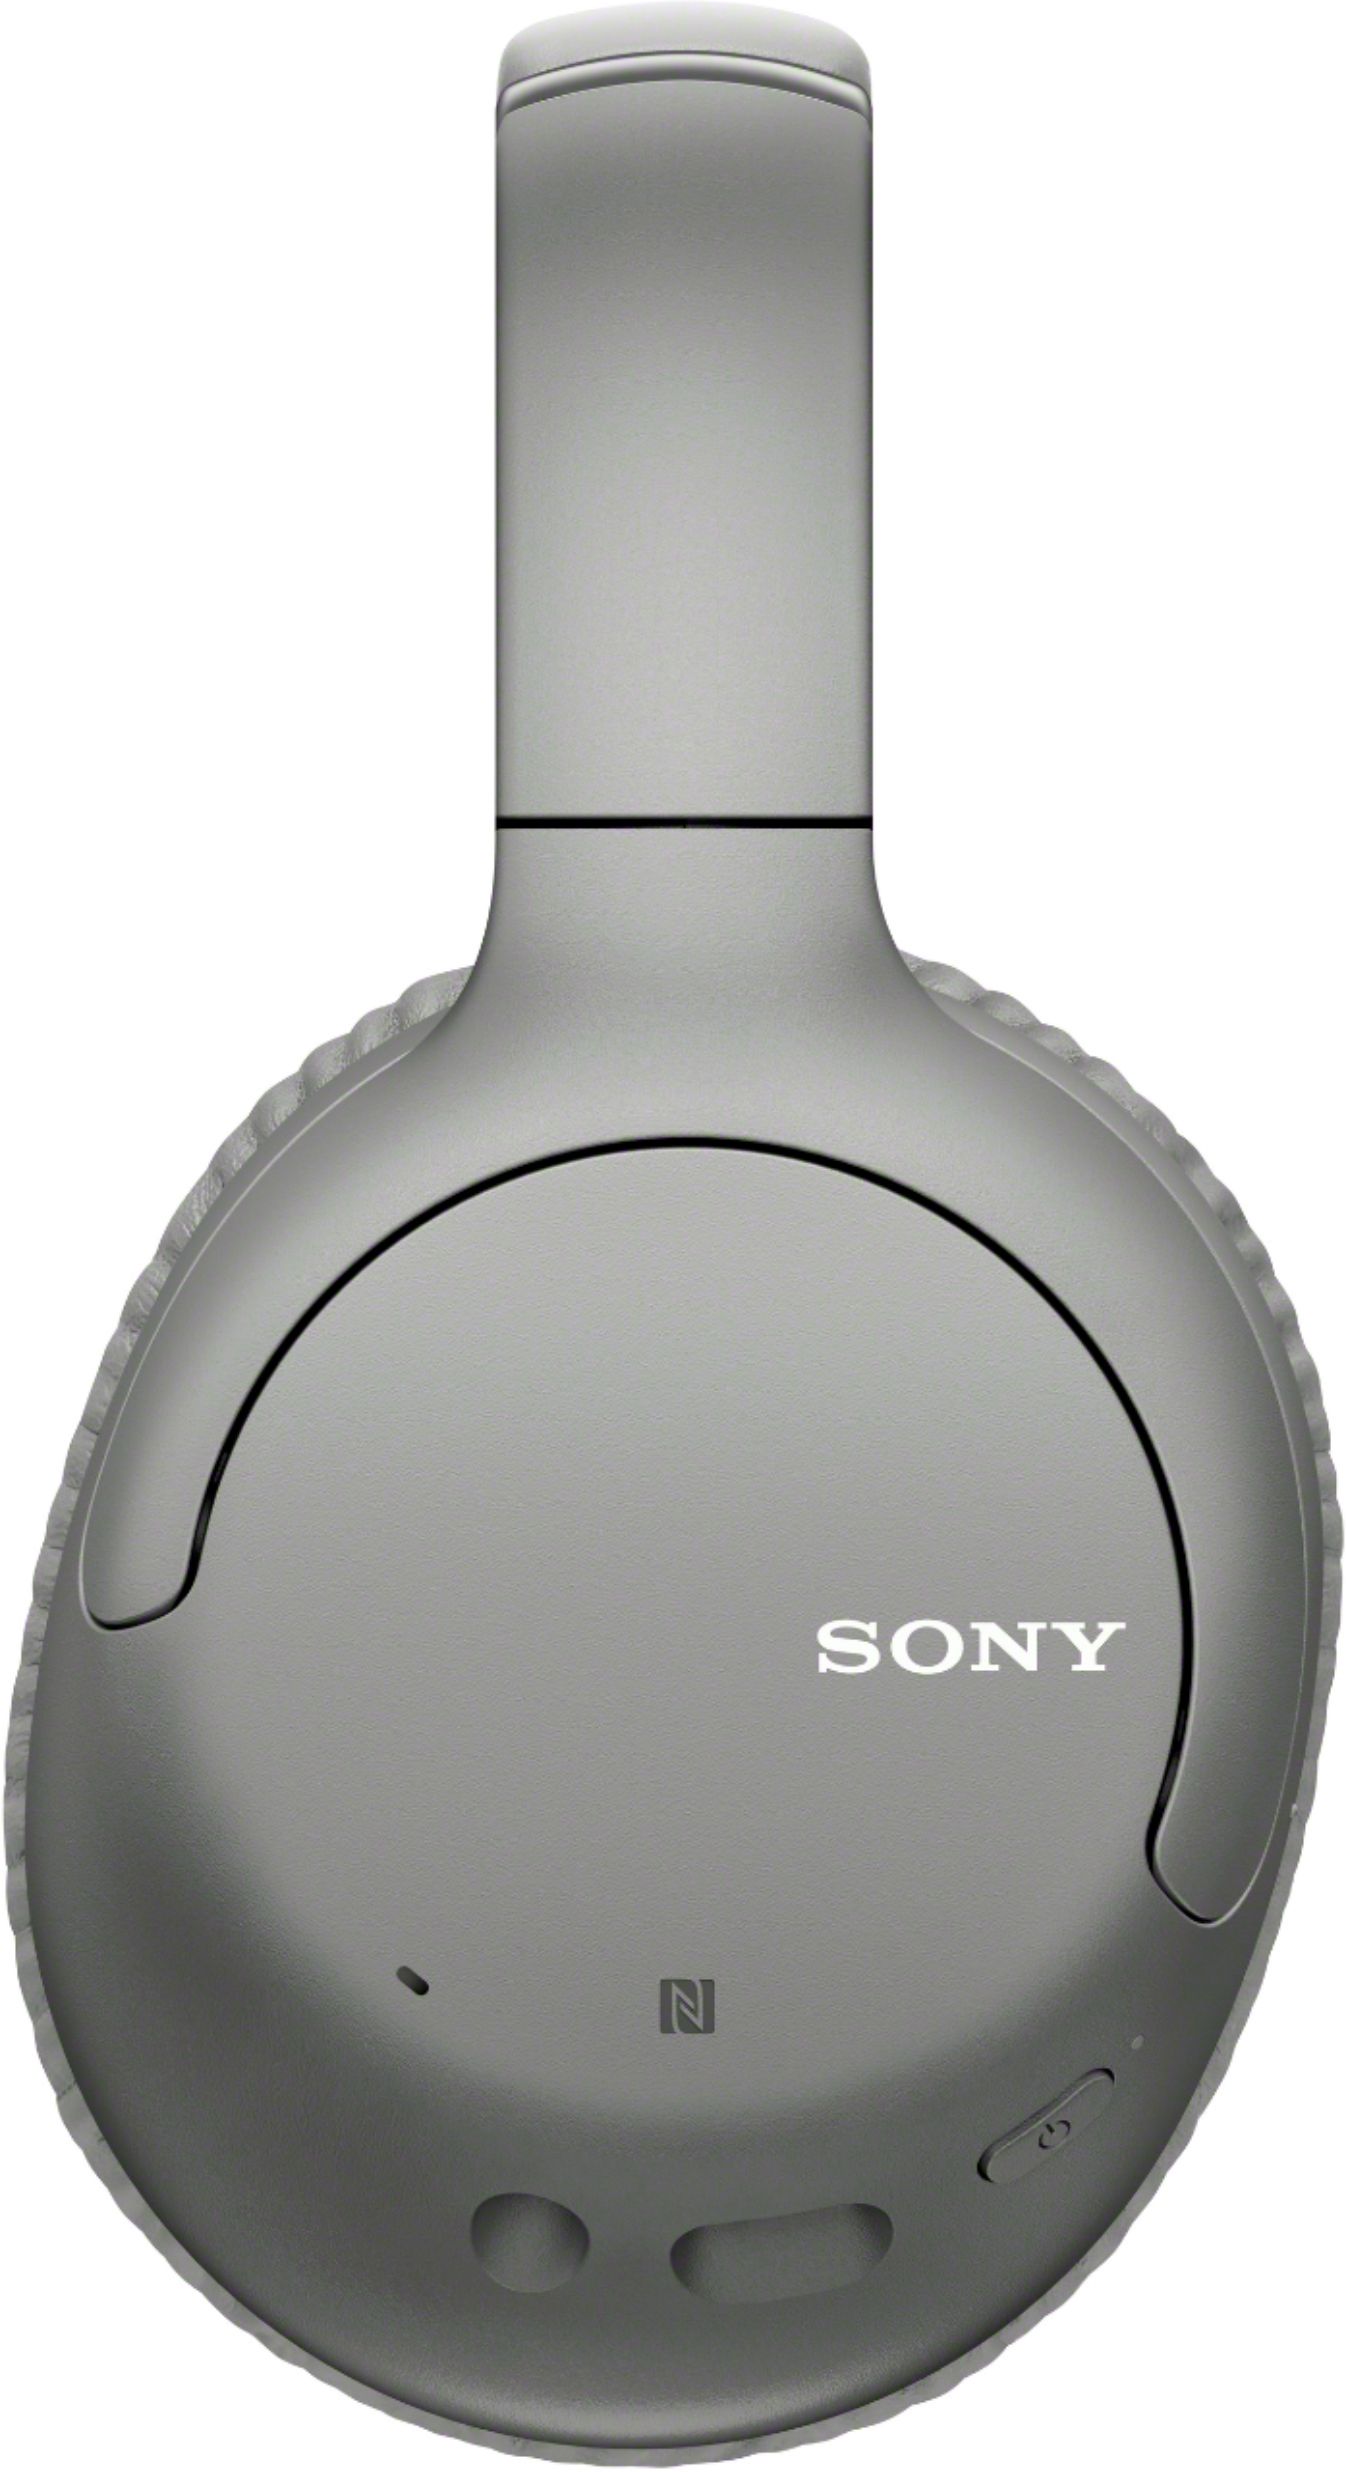 Sony WH-CH710N Headphones Review - Reviewed